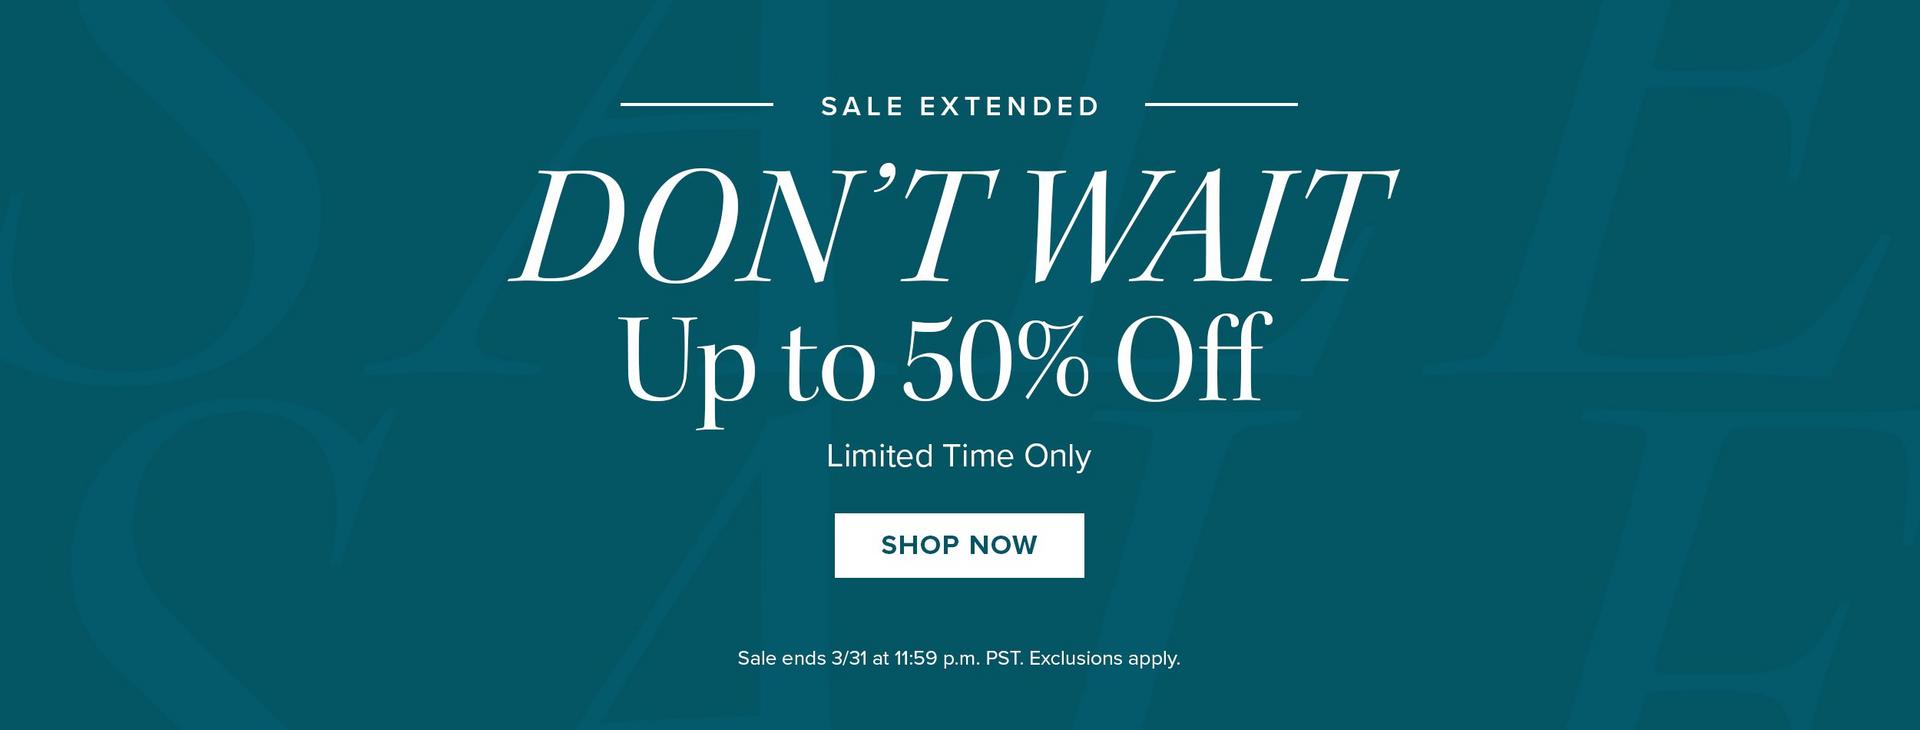 Sale Extended - Don't Wait, Up to 50% Off, Limited Time Only